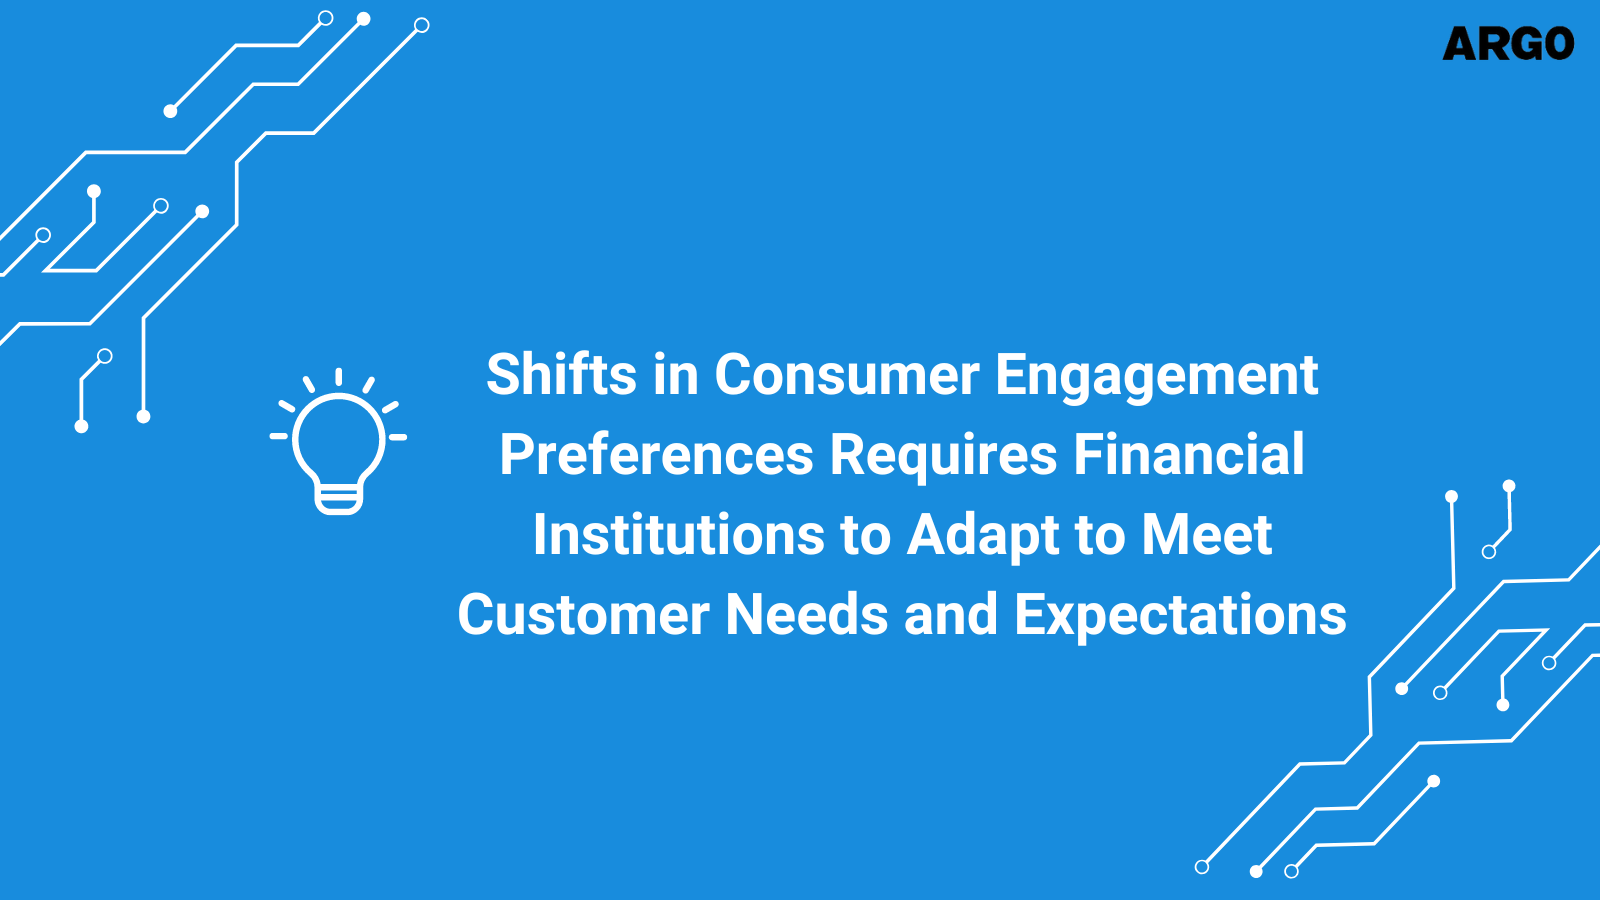 Shifts in Consumer Engagement Preferences Requires Financial Institutions to Adapt to Meet Customer Needs and Expectations